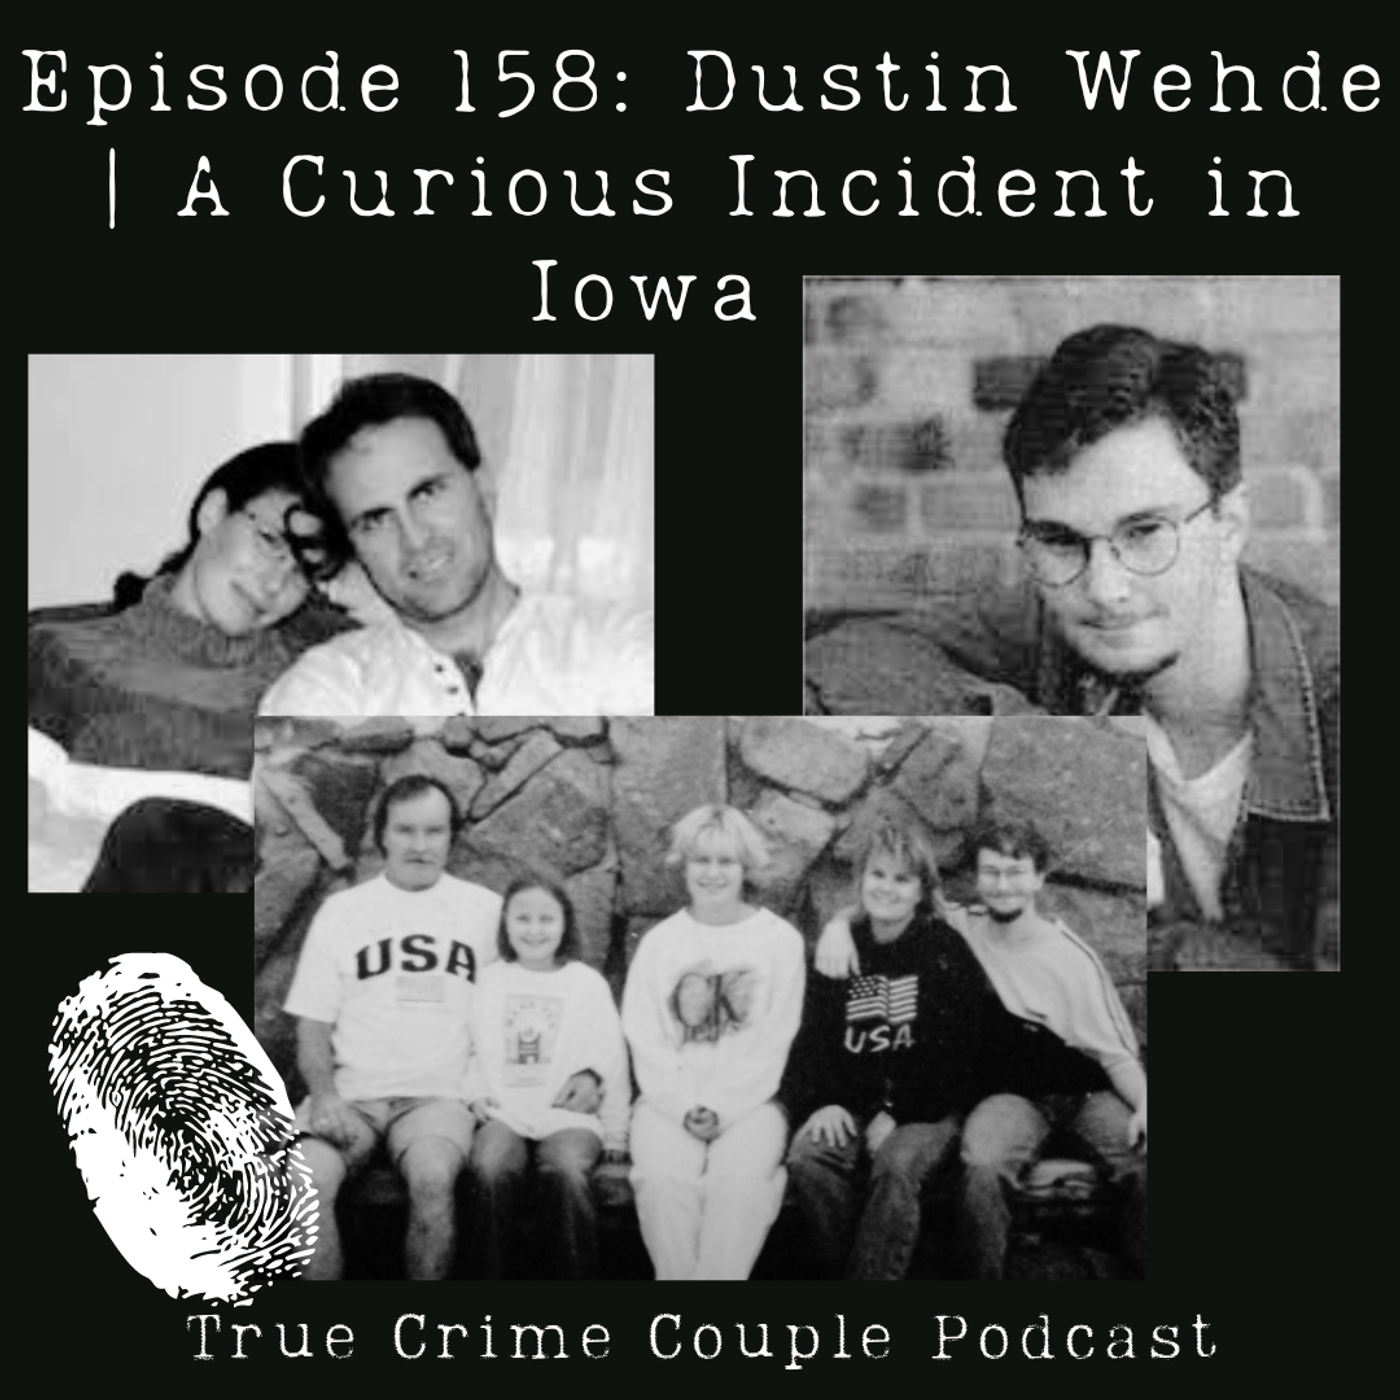 Episode 158: Dustin Wehde | A Curious Incident in Iowa